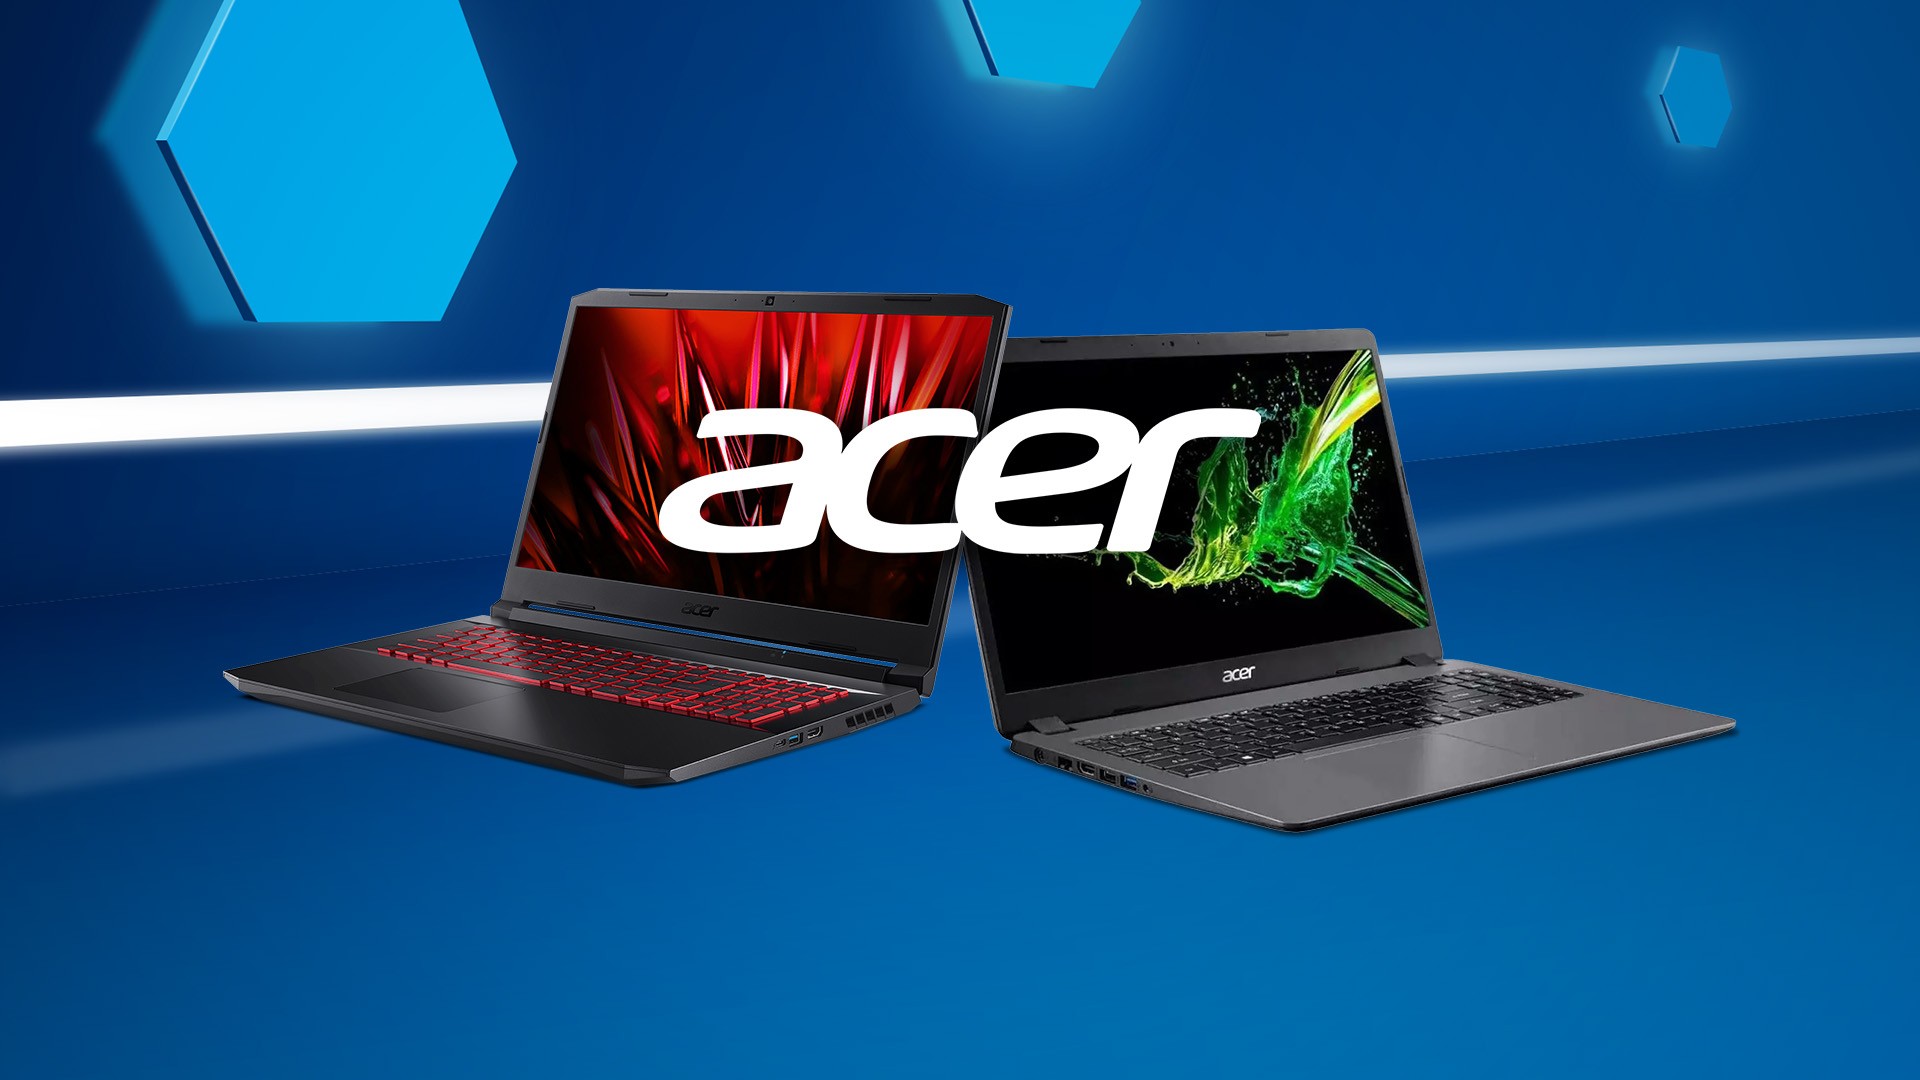 Ms. de Consommidor: Acer offers coupons, product discounts, and giveaways